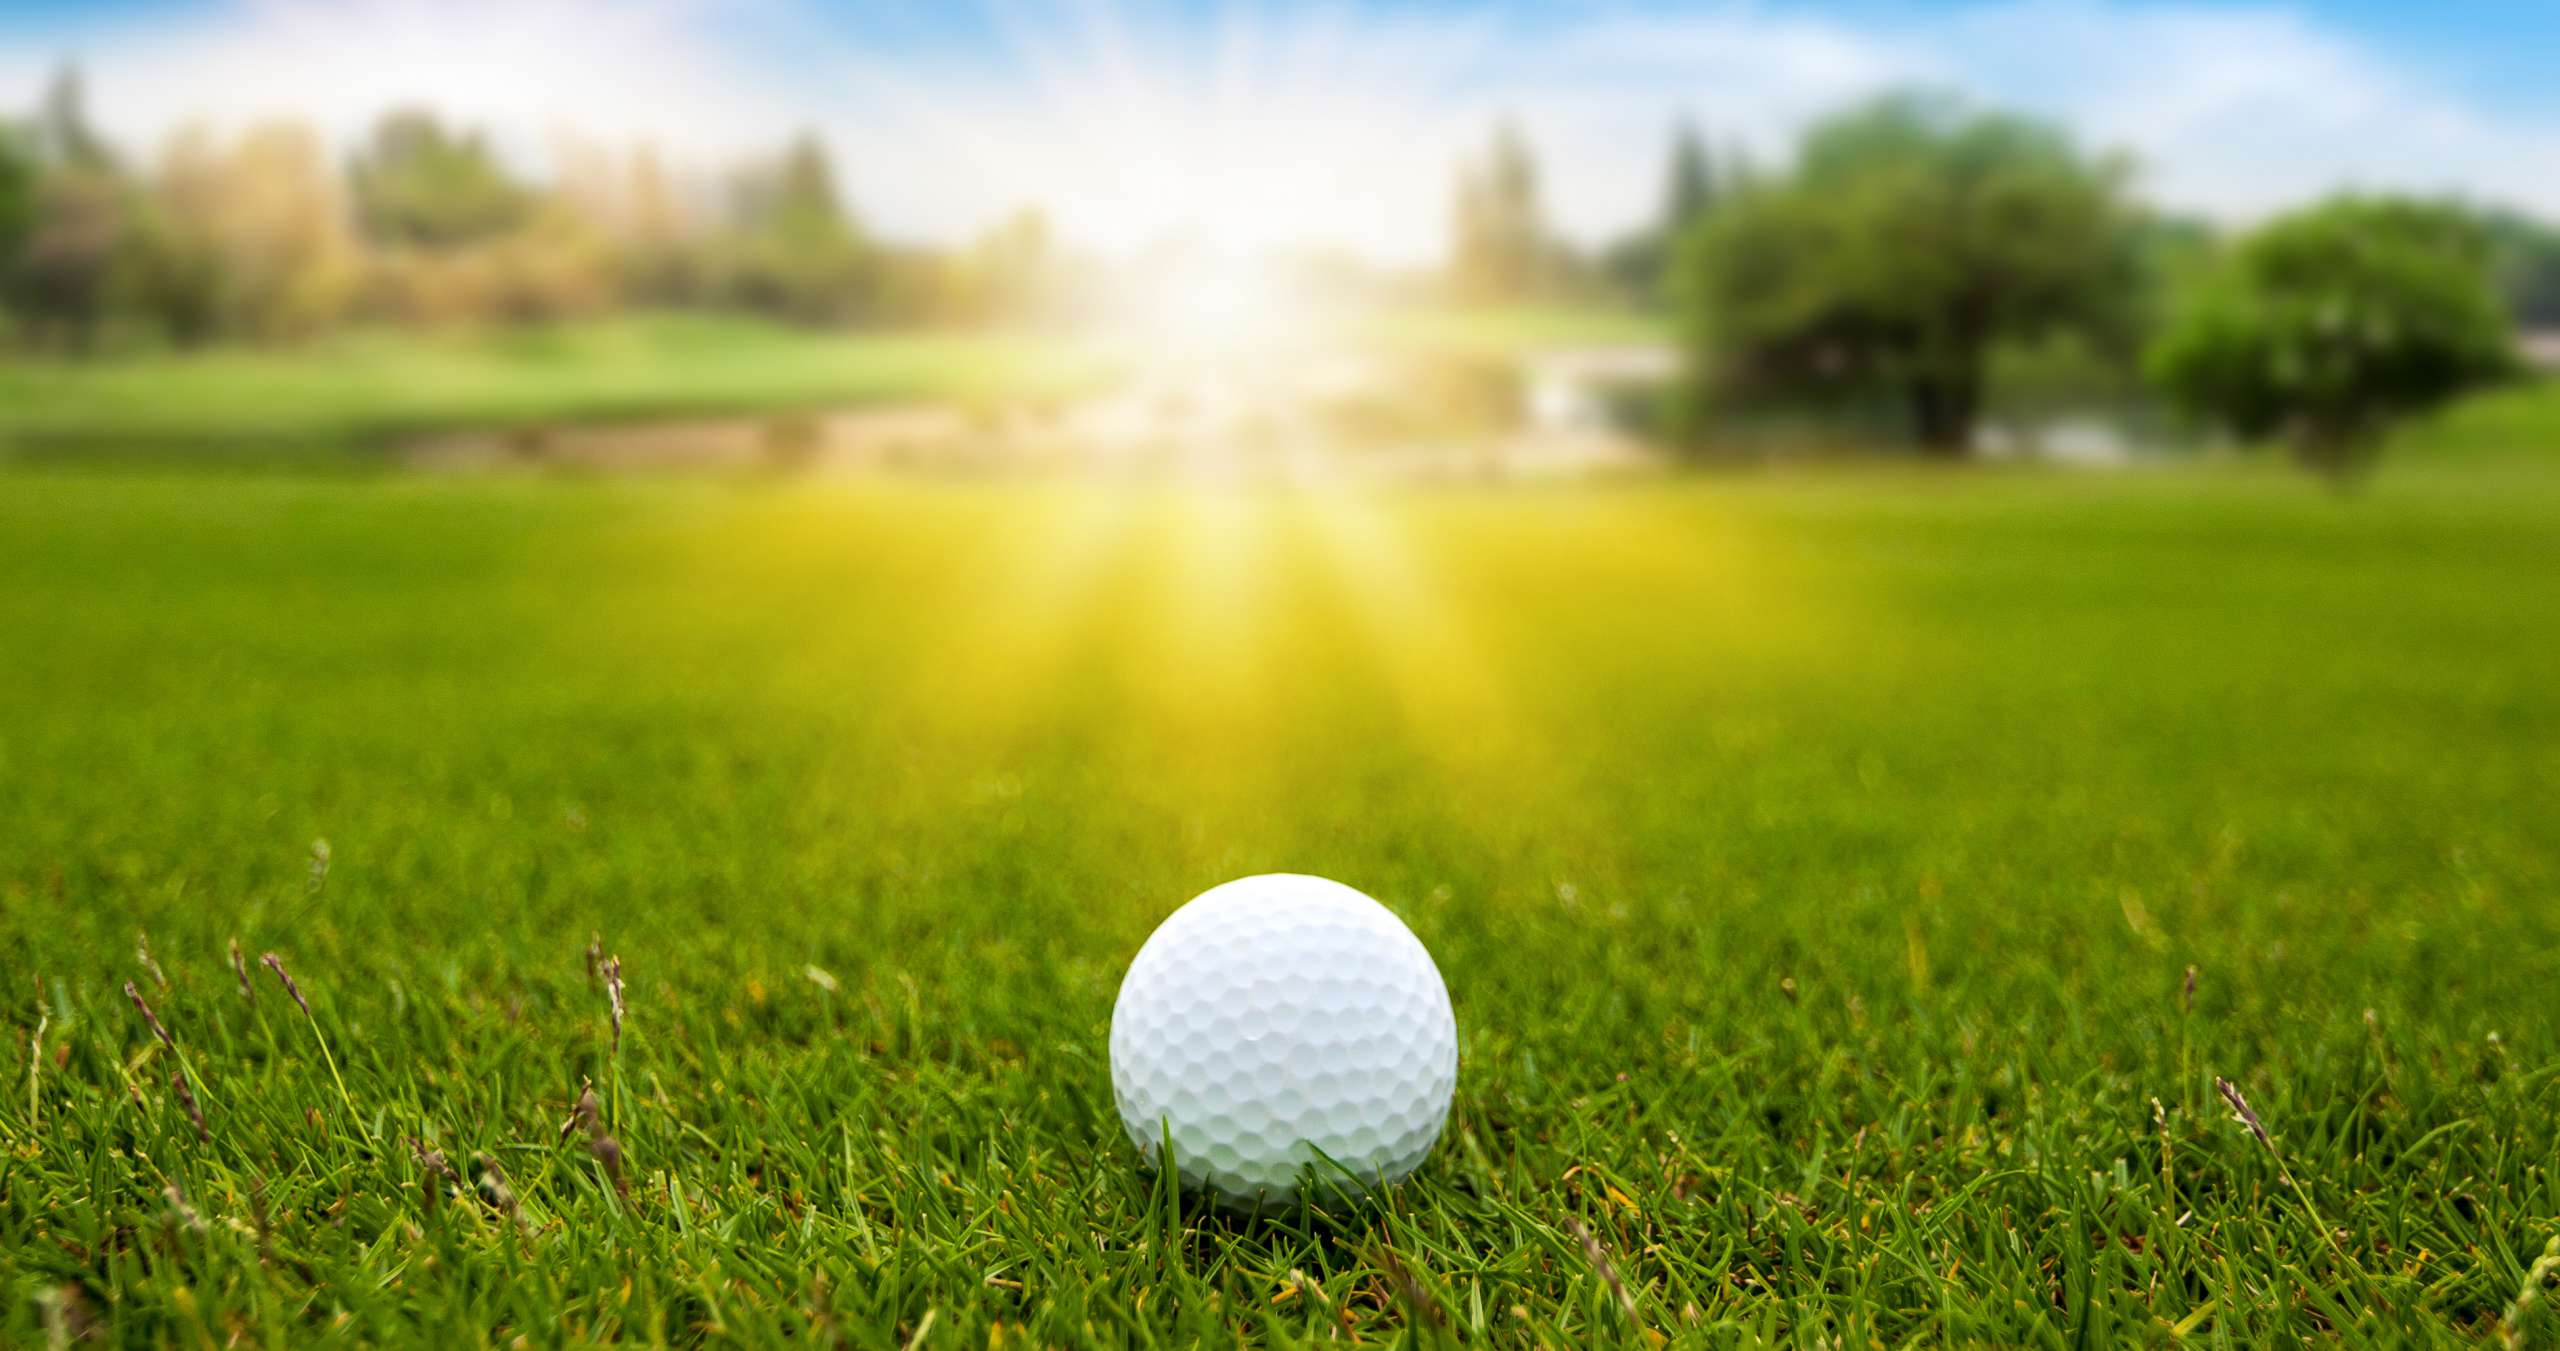 Golf ball on green grass on blurred beautiful landscape of golf course